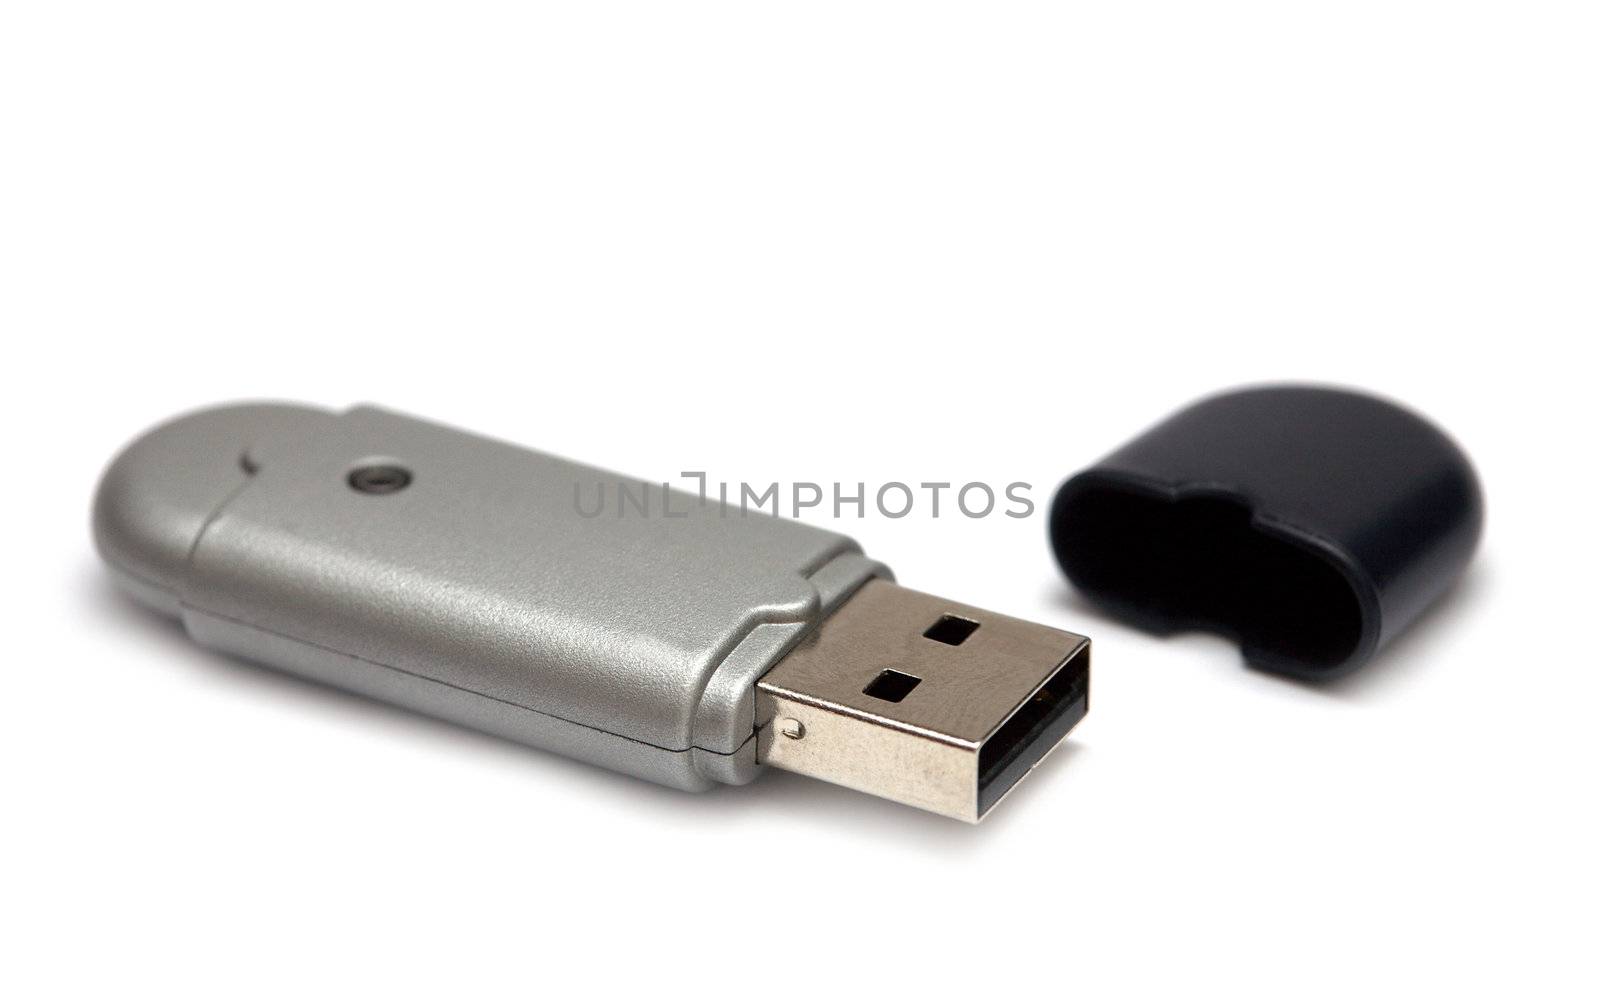 A USB device that can be a memory stick, pen drive, bluetooth or anything else!